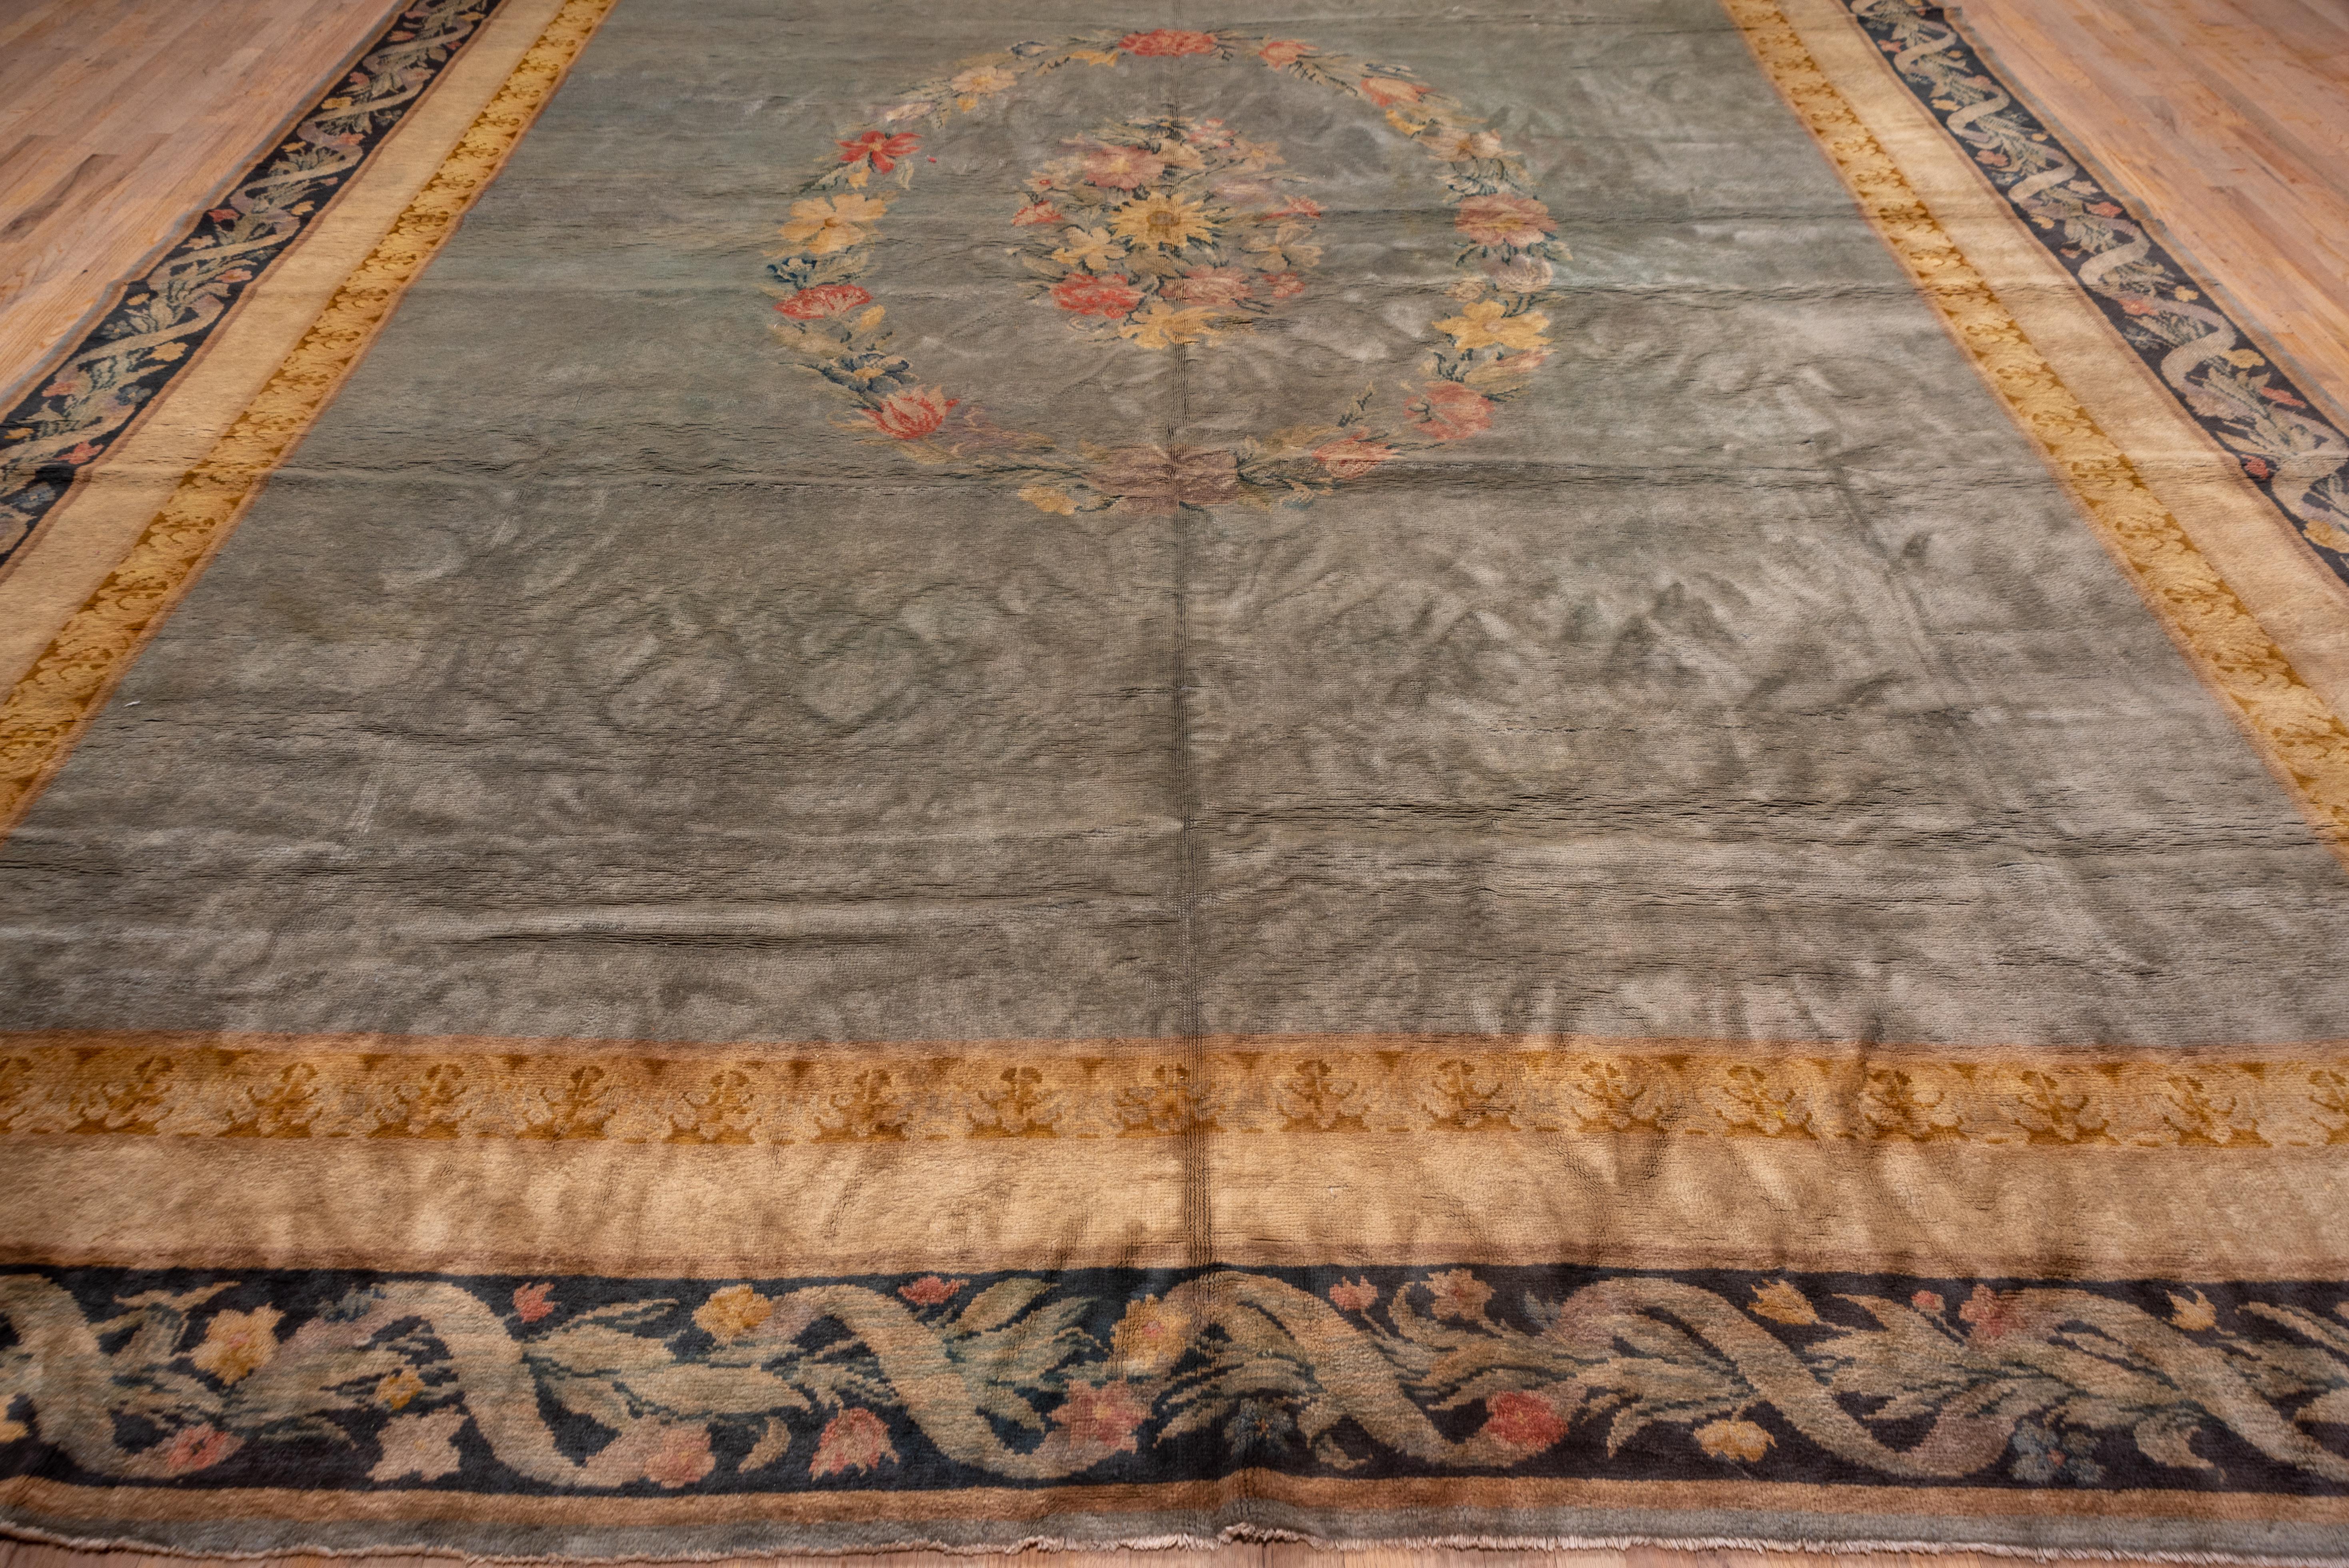 This thick pile, excellent condition French urban carpet features a ribbon and flower border with corner calyxes, framing a light green field with a central leaf and flower wreath surrounding a central bouquet. The field is otherwise unornamented.